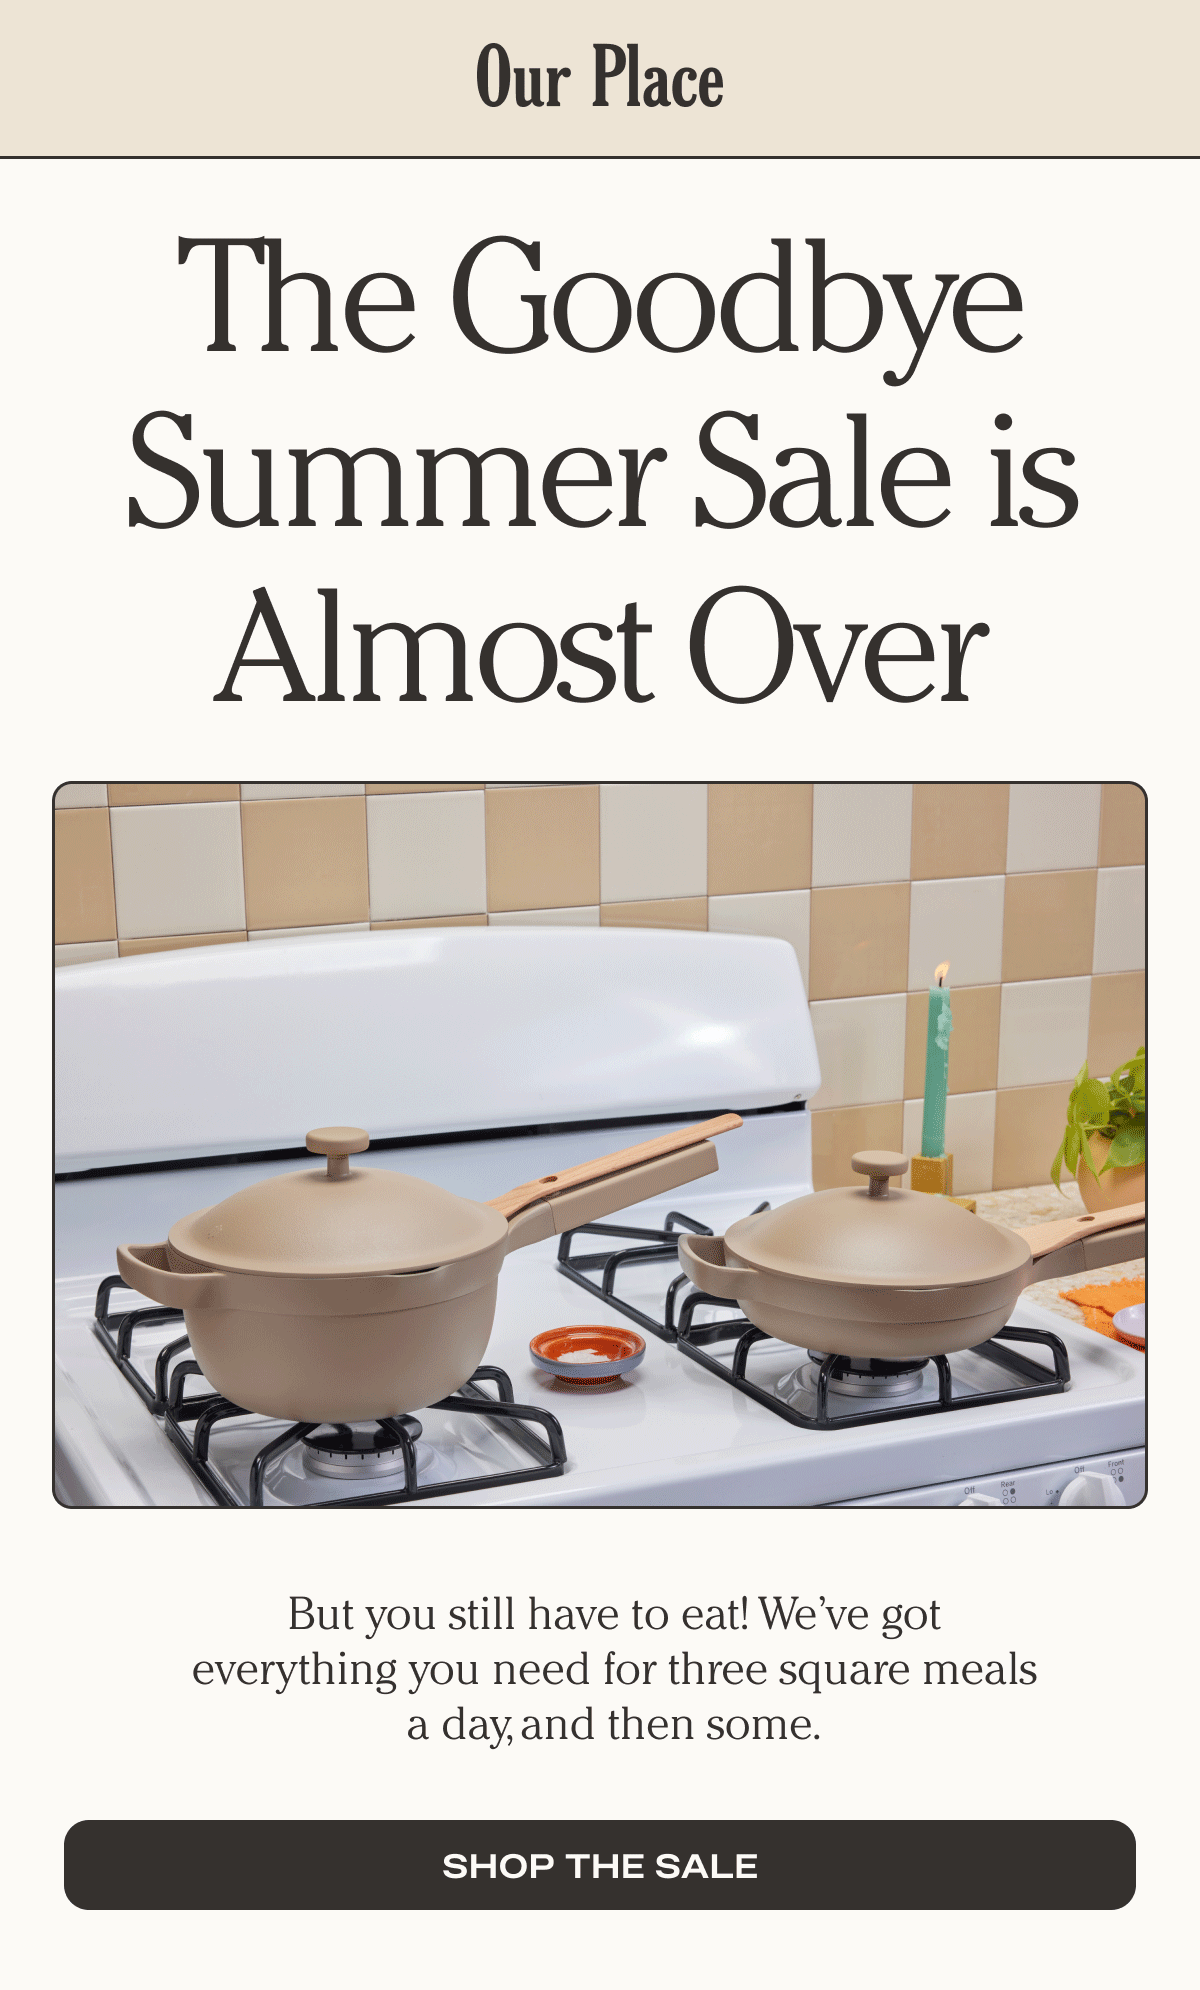 The Goodbye Summer Sale is almost over - But you still have to eat! We’ve got everything you need for three square meals a day, and then some. - Shop the sale